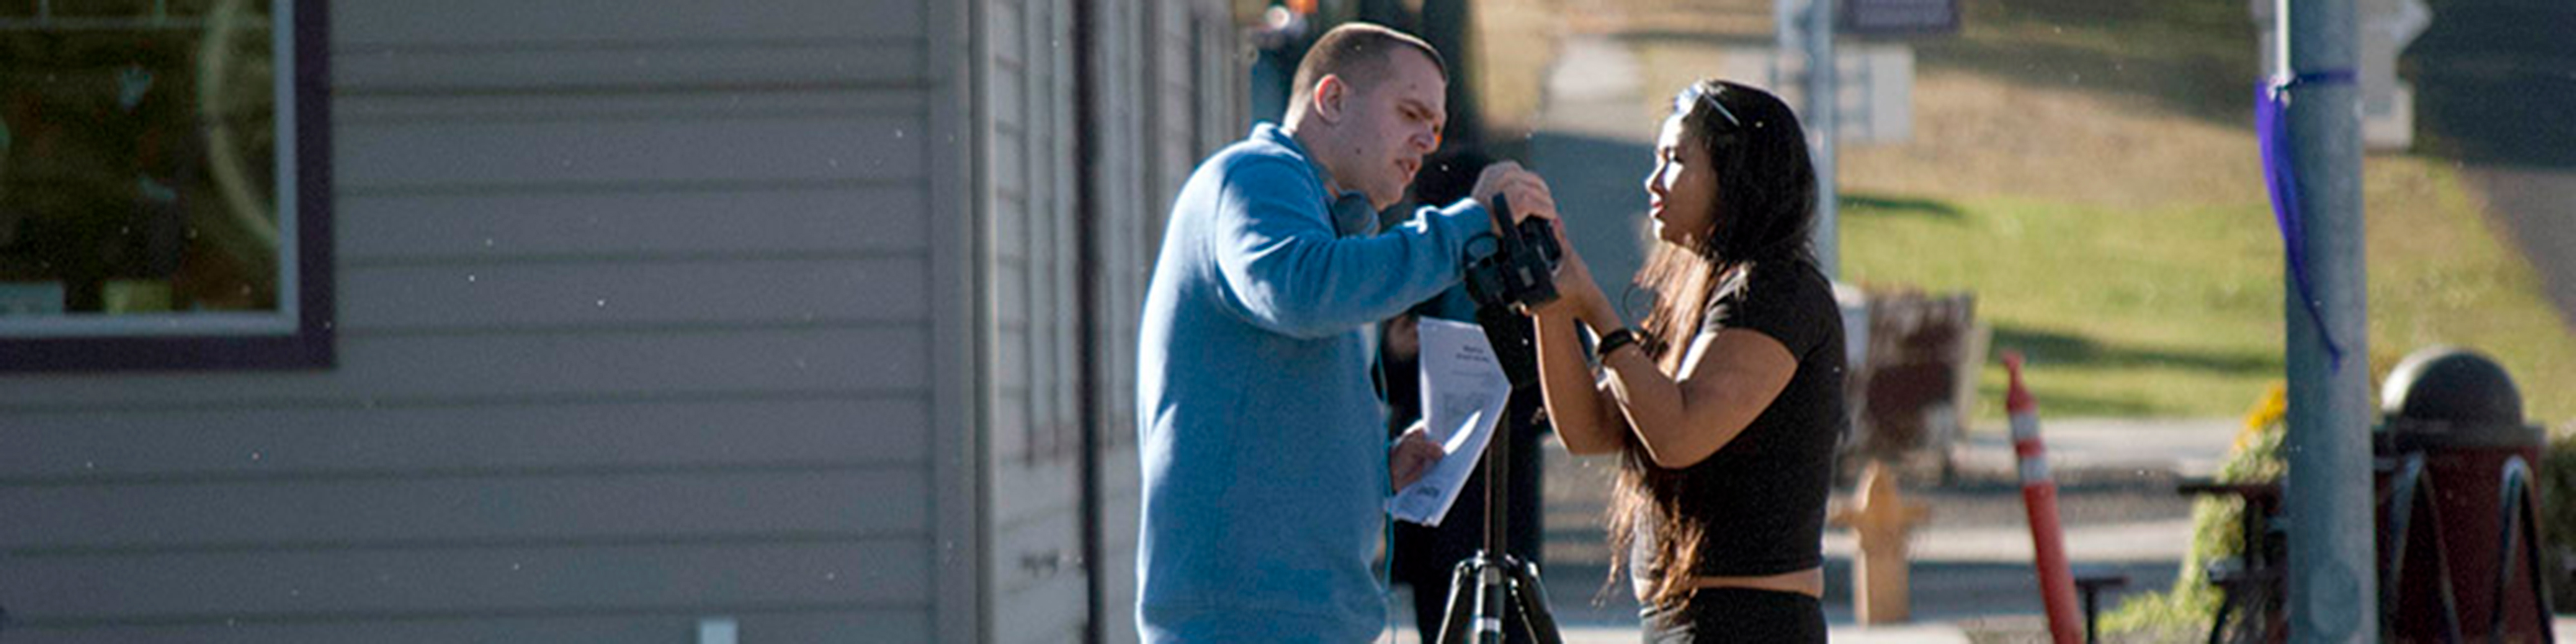 Two student journalists set up a camera on a street